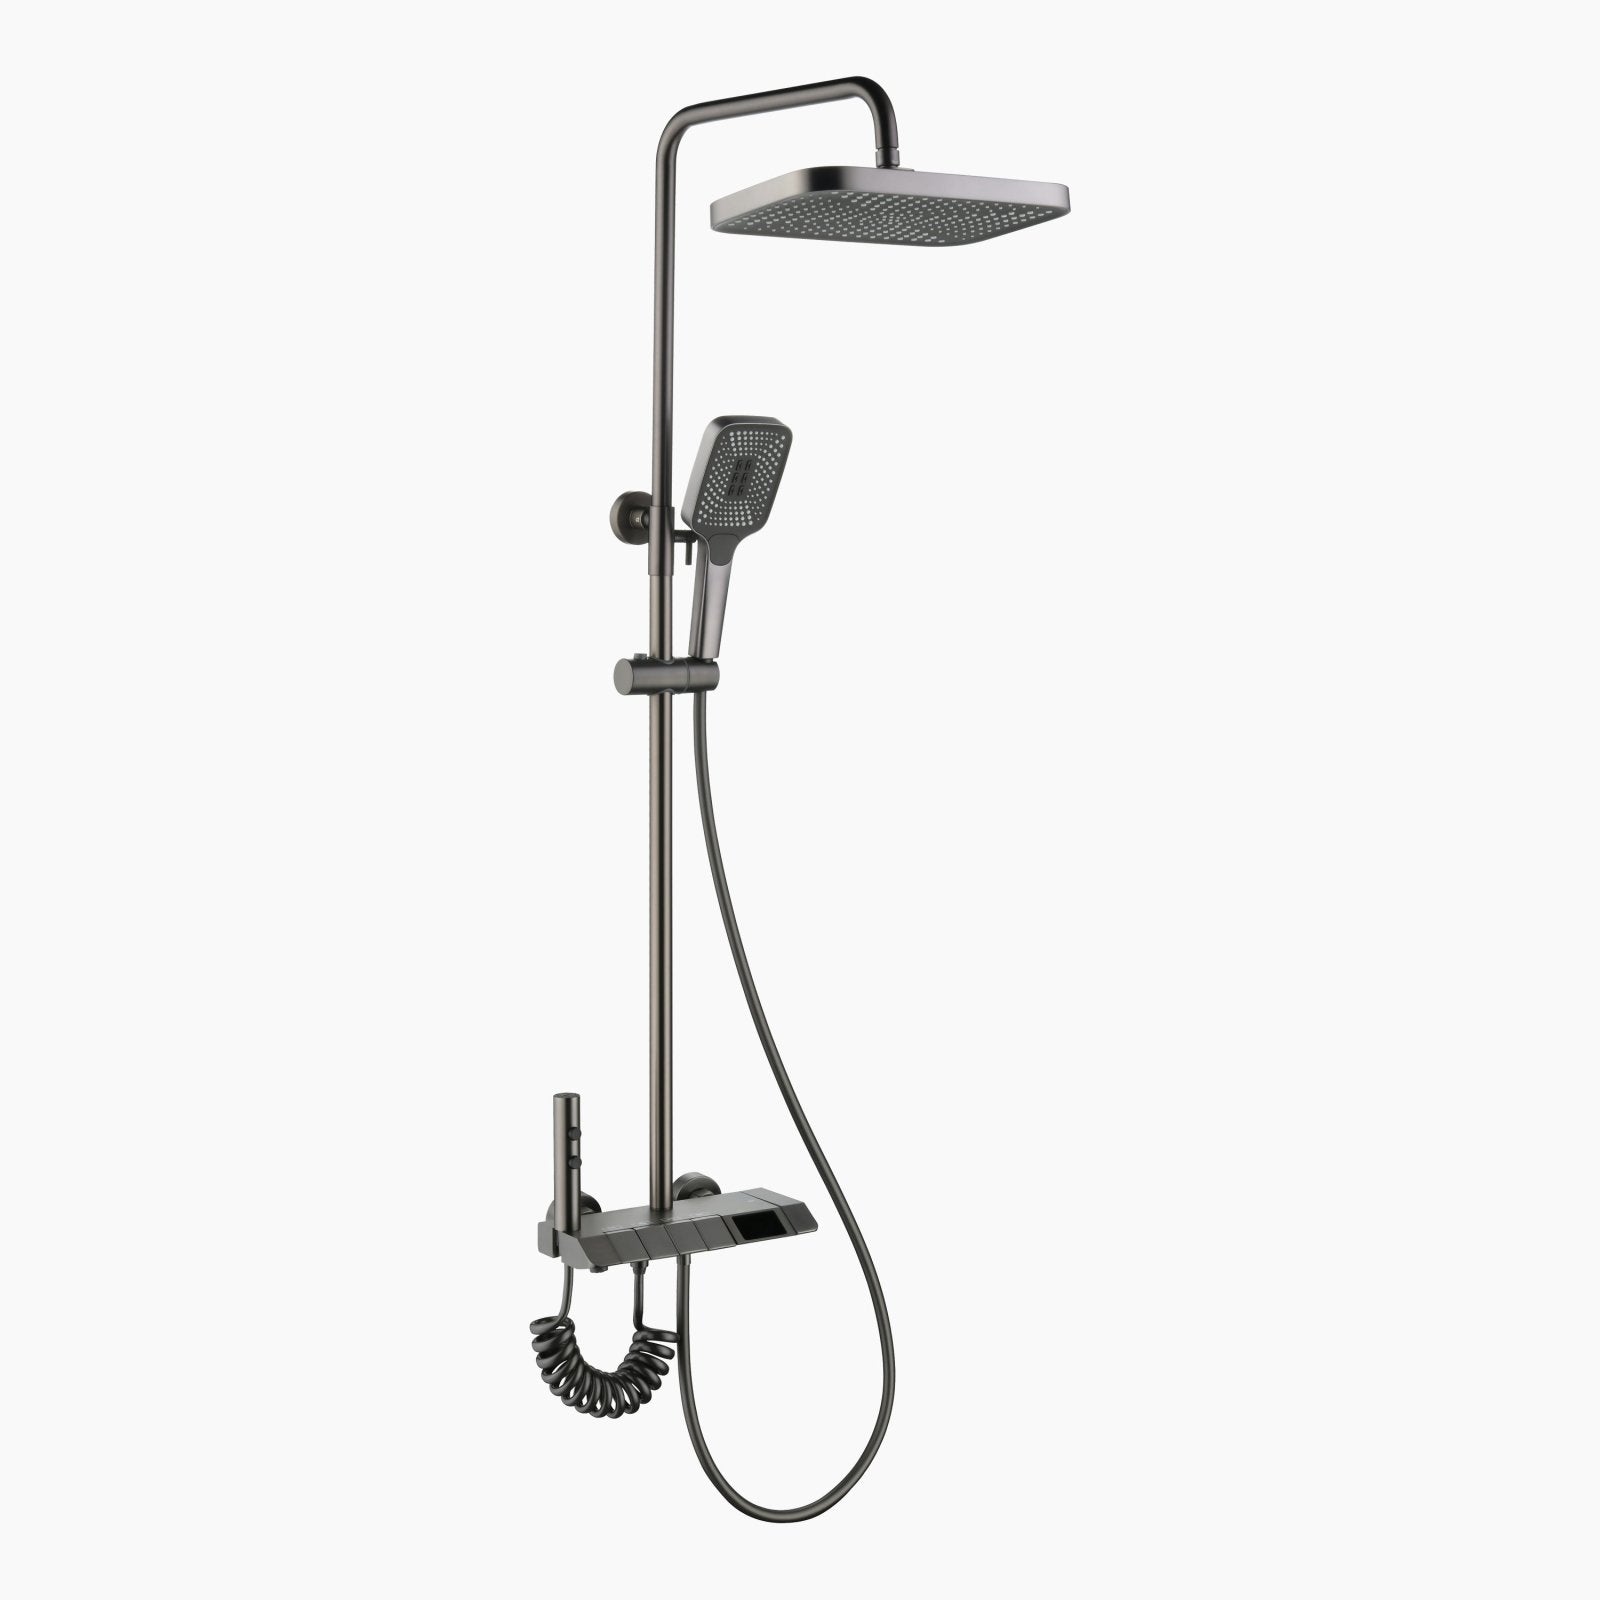 Lefton Thermostatic Shower System with Temperature Display and 4 Water Outlet Modes-SST2202 -Shower Systems- Lefton Home